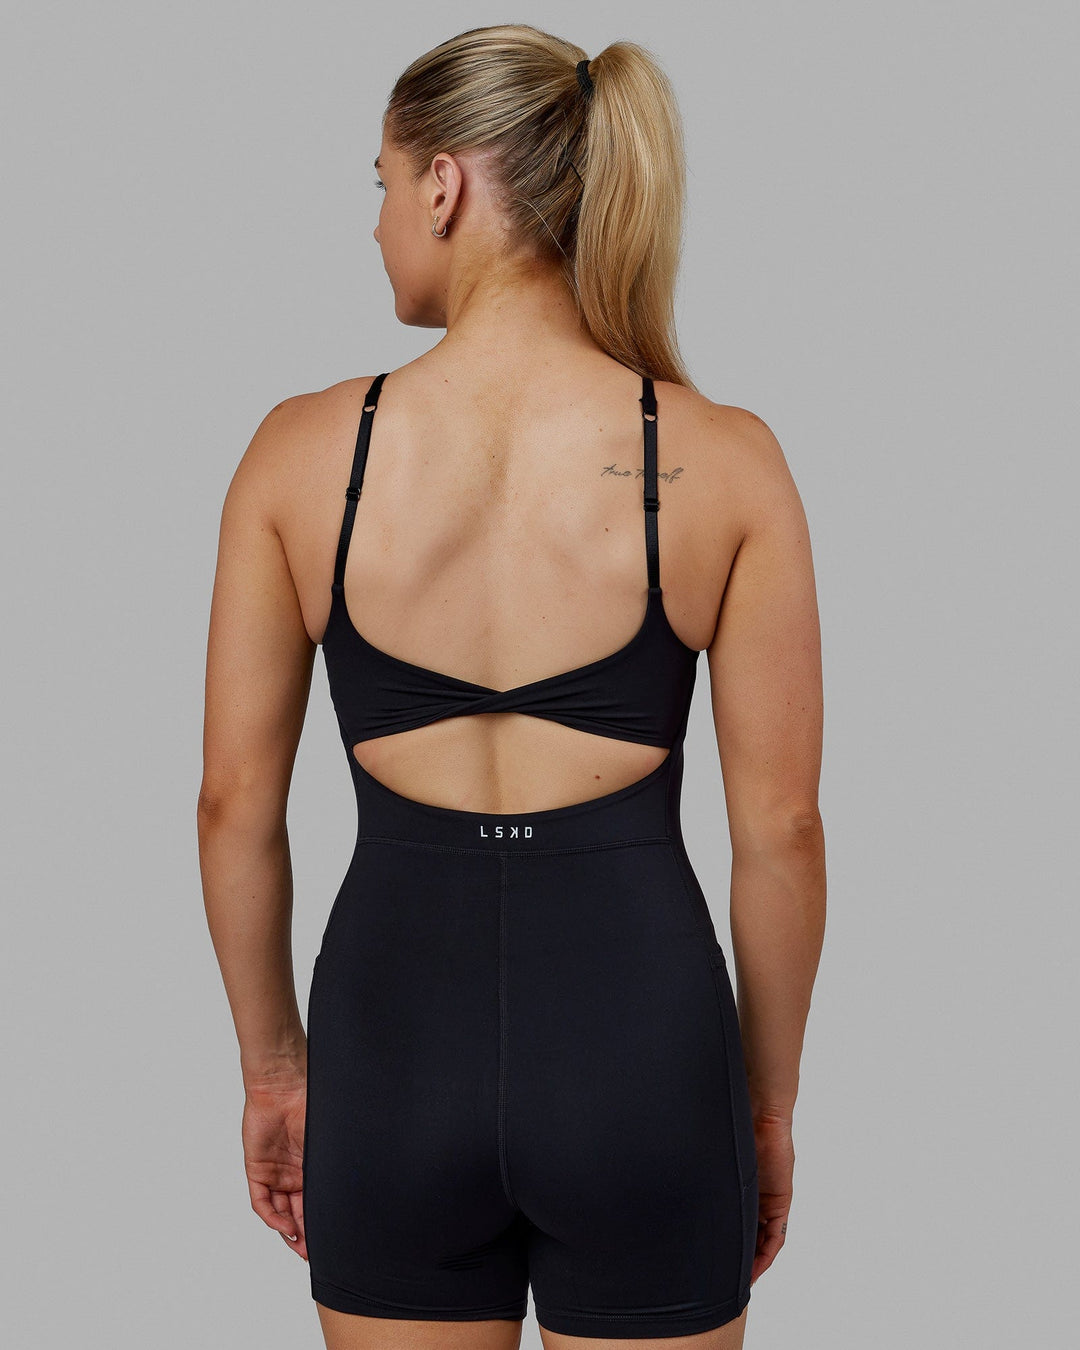 LSKD - The Technique Bodysuit 💥 Unrestricted movement takes on a